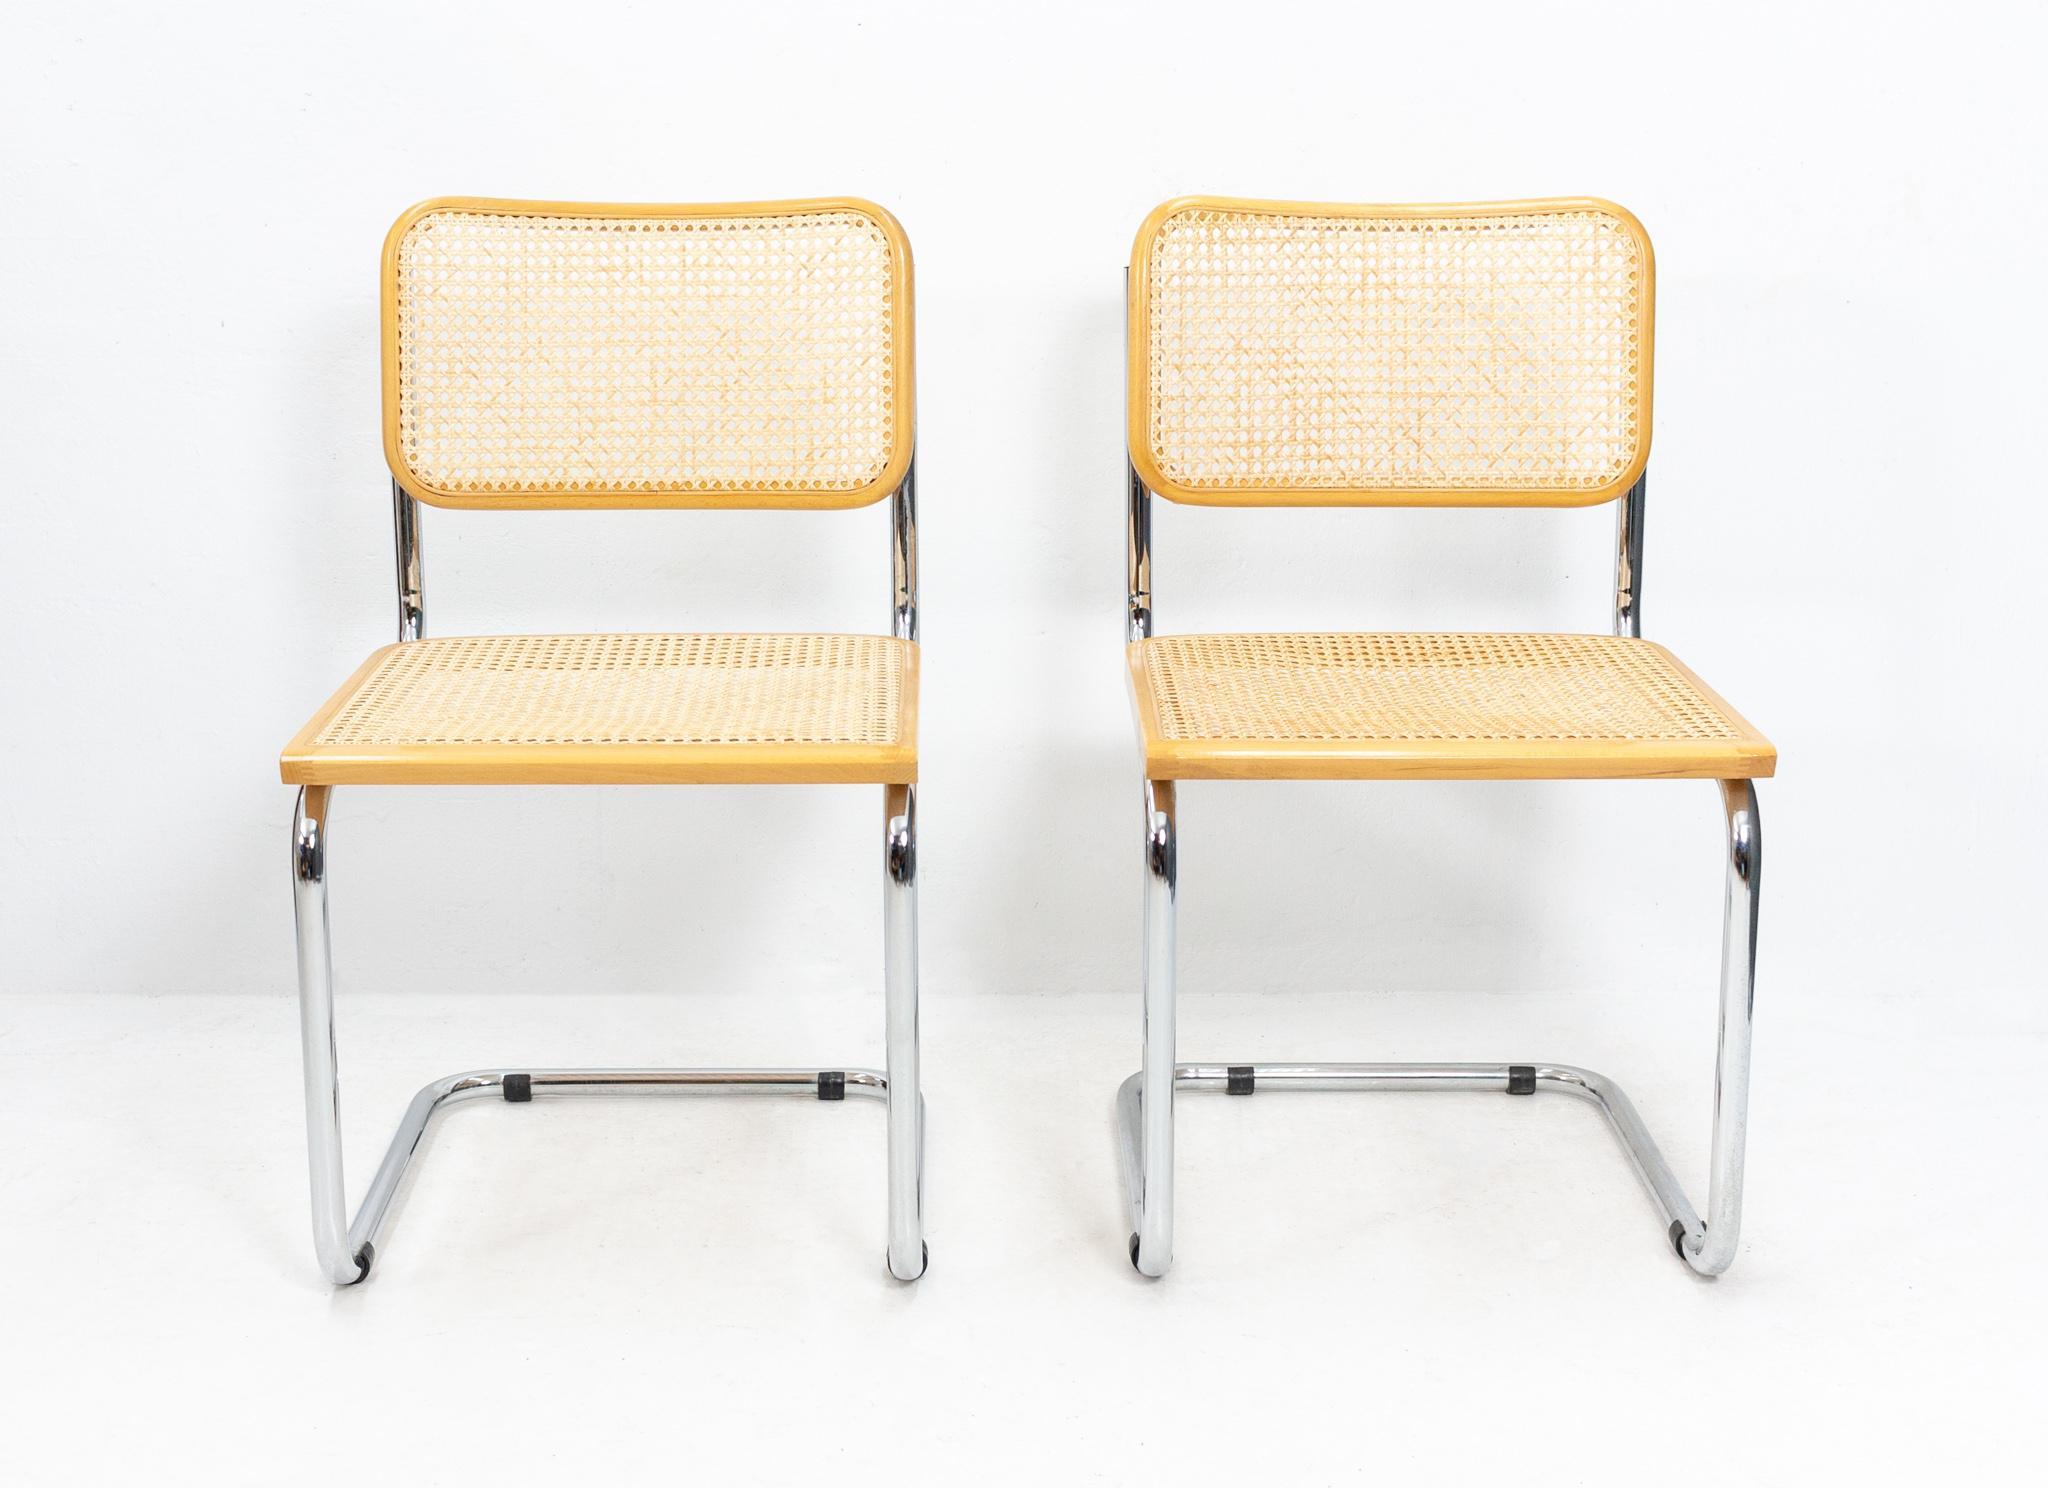 Beautiful set of 2 dining table chairs with chrome frame, seat and backrest of woven cane and naturel beech edges. The Cesca S32 chair was designed in 1928 by Marcel Breuer and produced by Thonet. This version was made in Italy, 1999. The chairs are